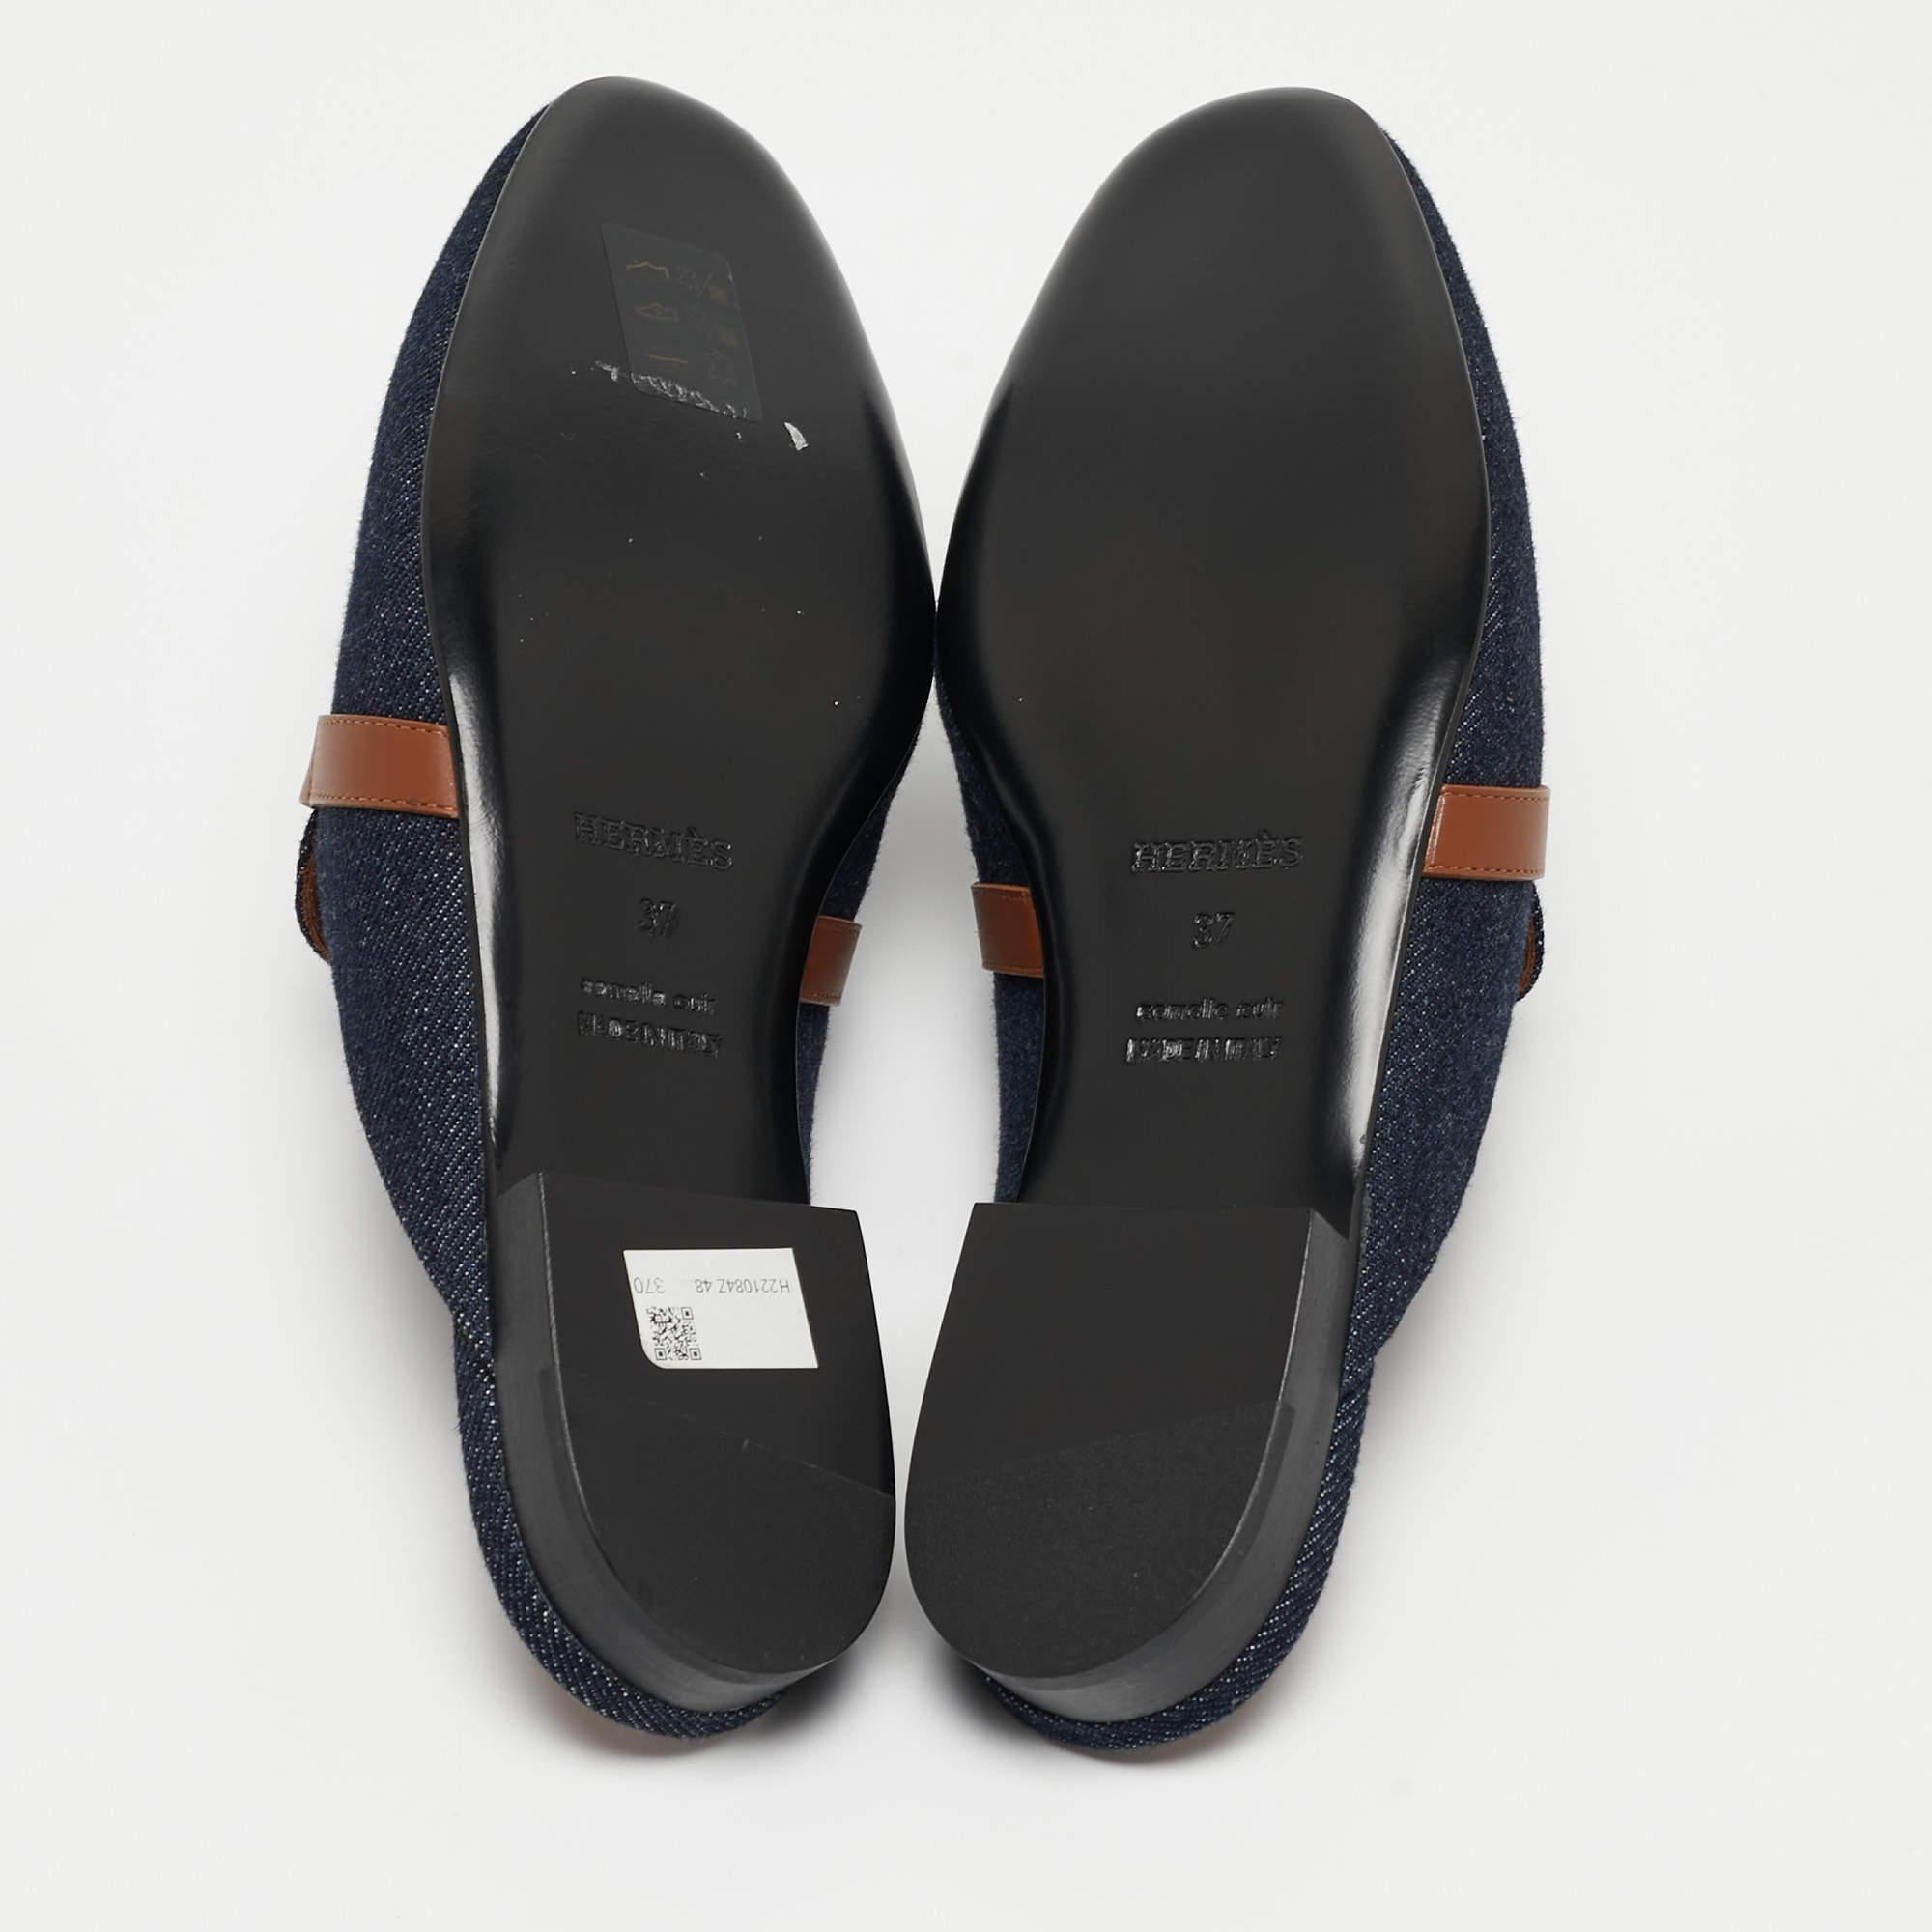 Hermes Navy Blue/Tan Denim and Leather Oz Flat Mules Size 37 1